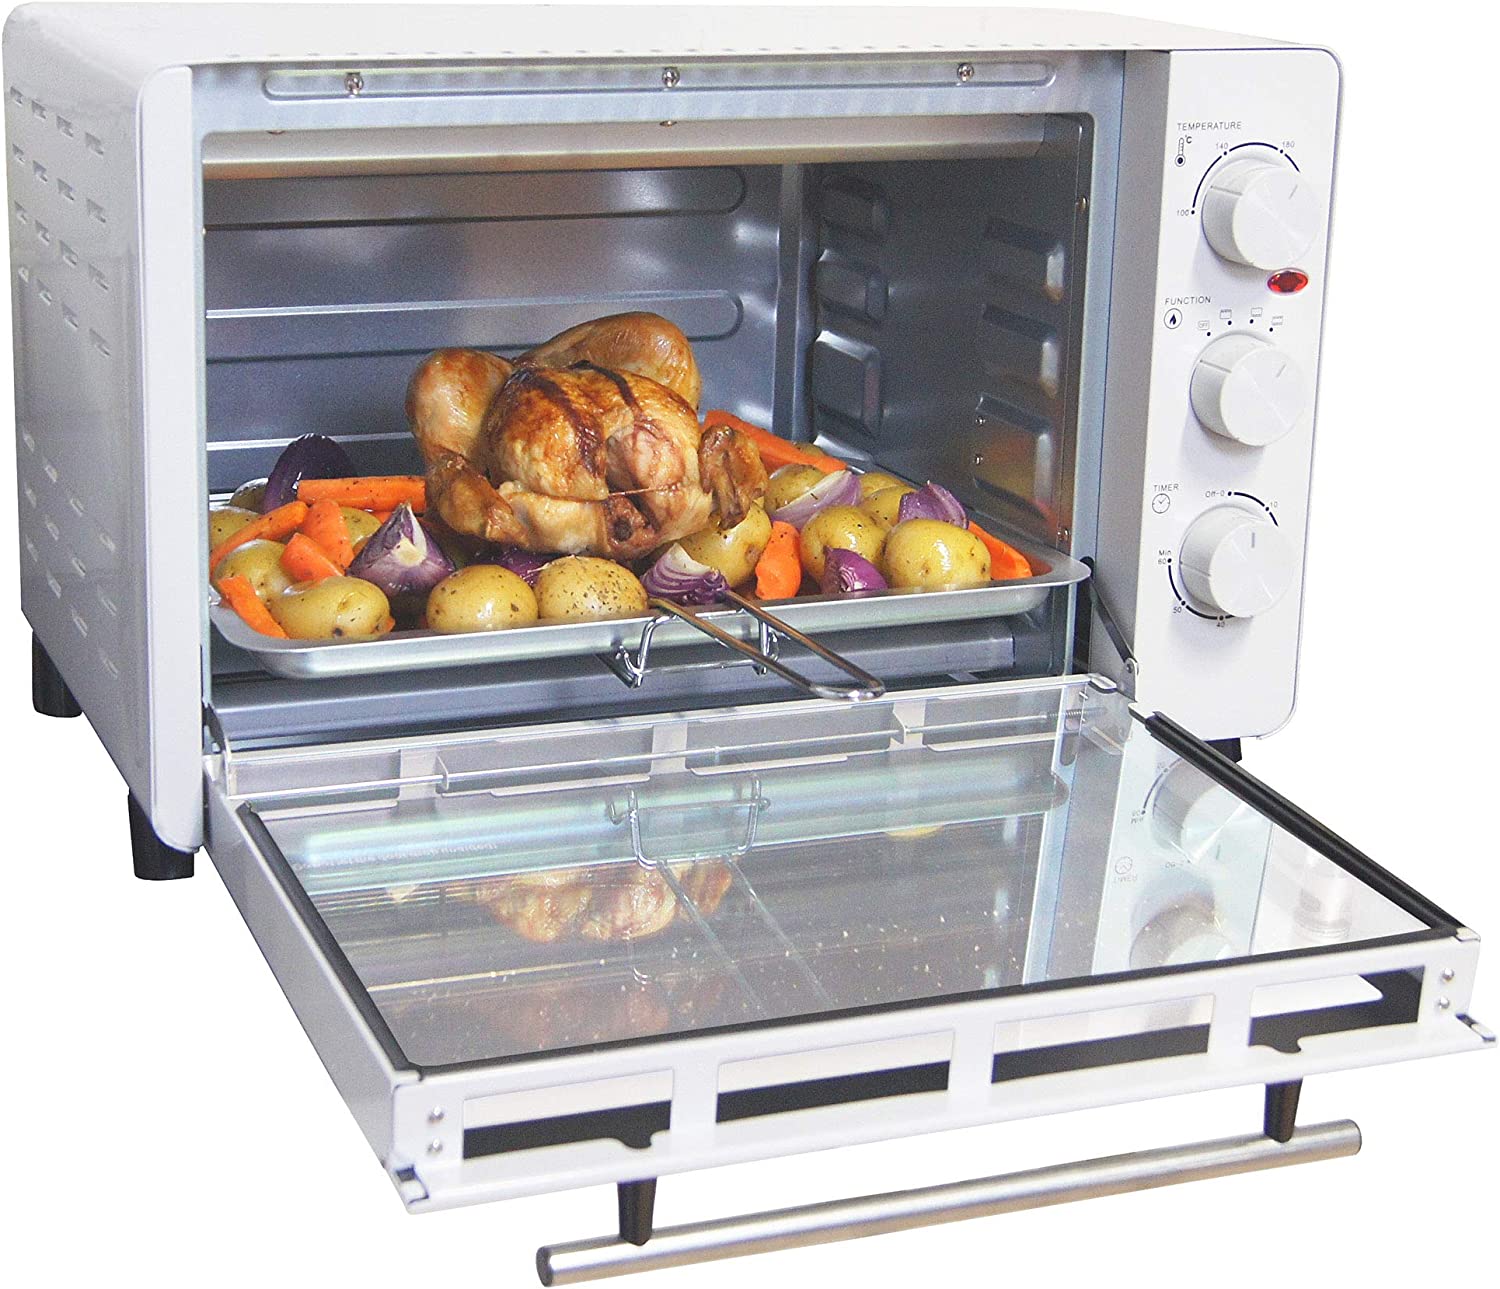 Igenix IG7131 30 Litre Countertop Mini Oven Electric Cooker and Grill, Ideal for Roasting, Baking, Grilling